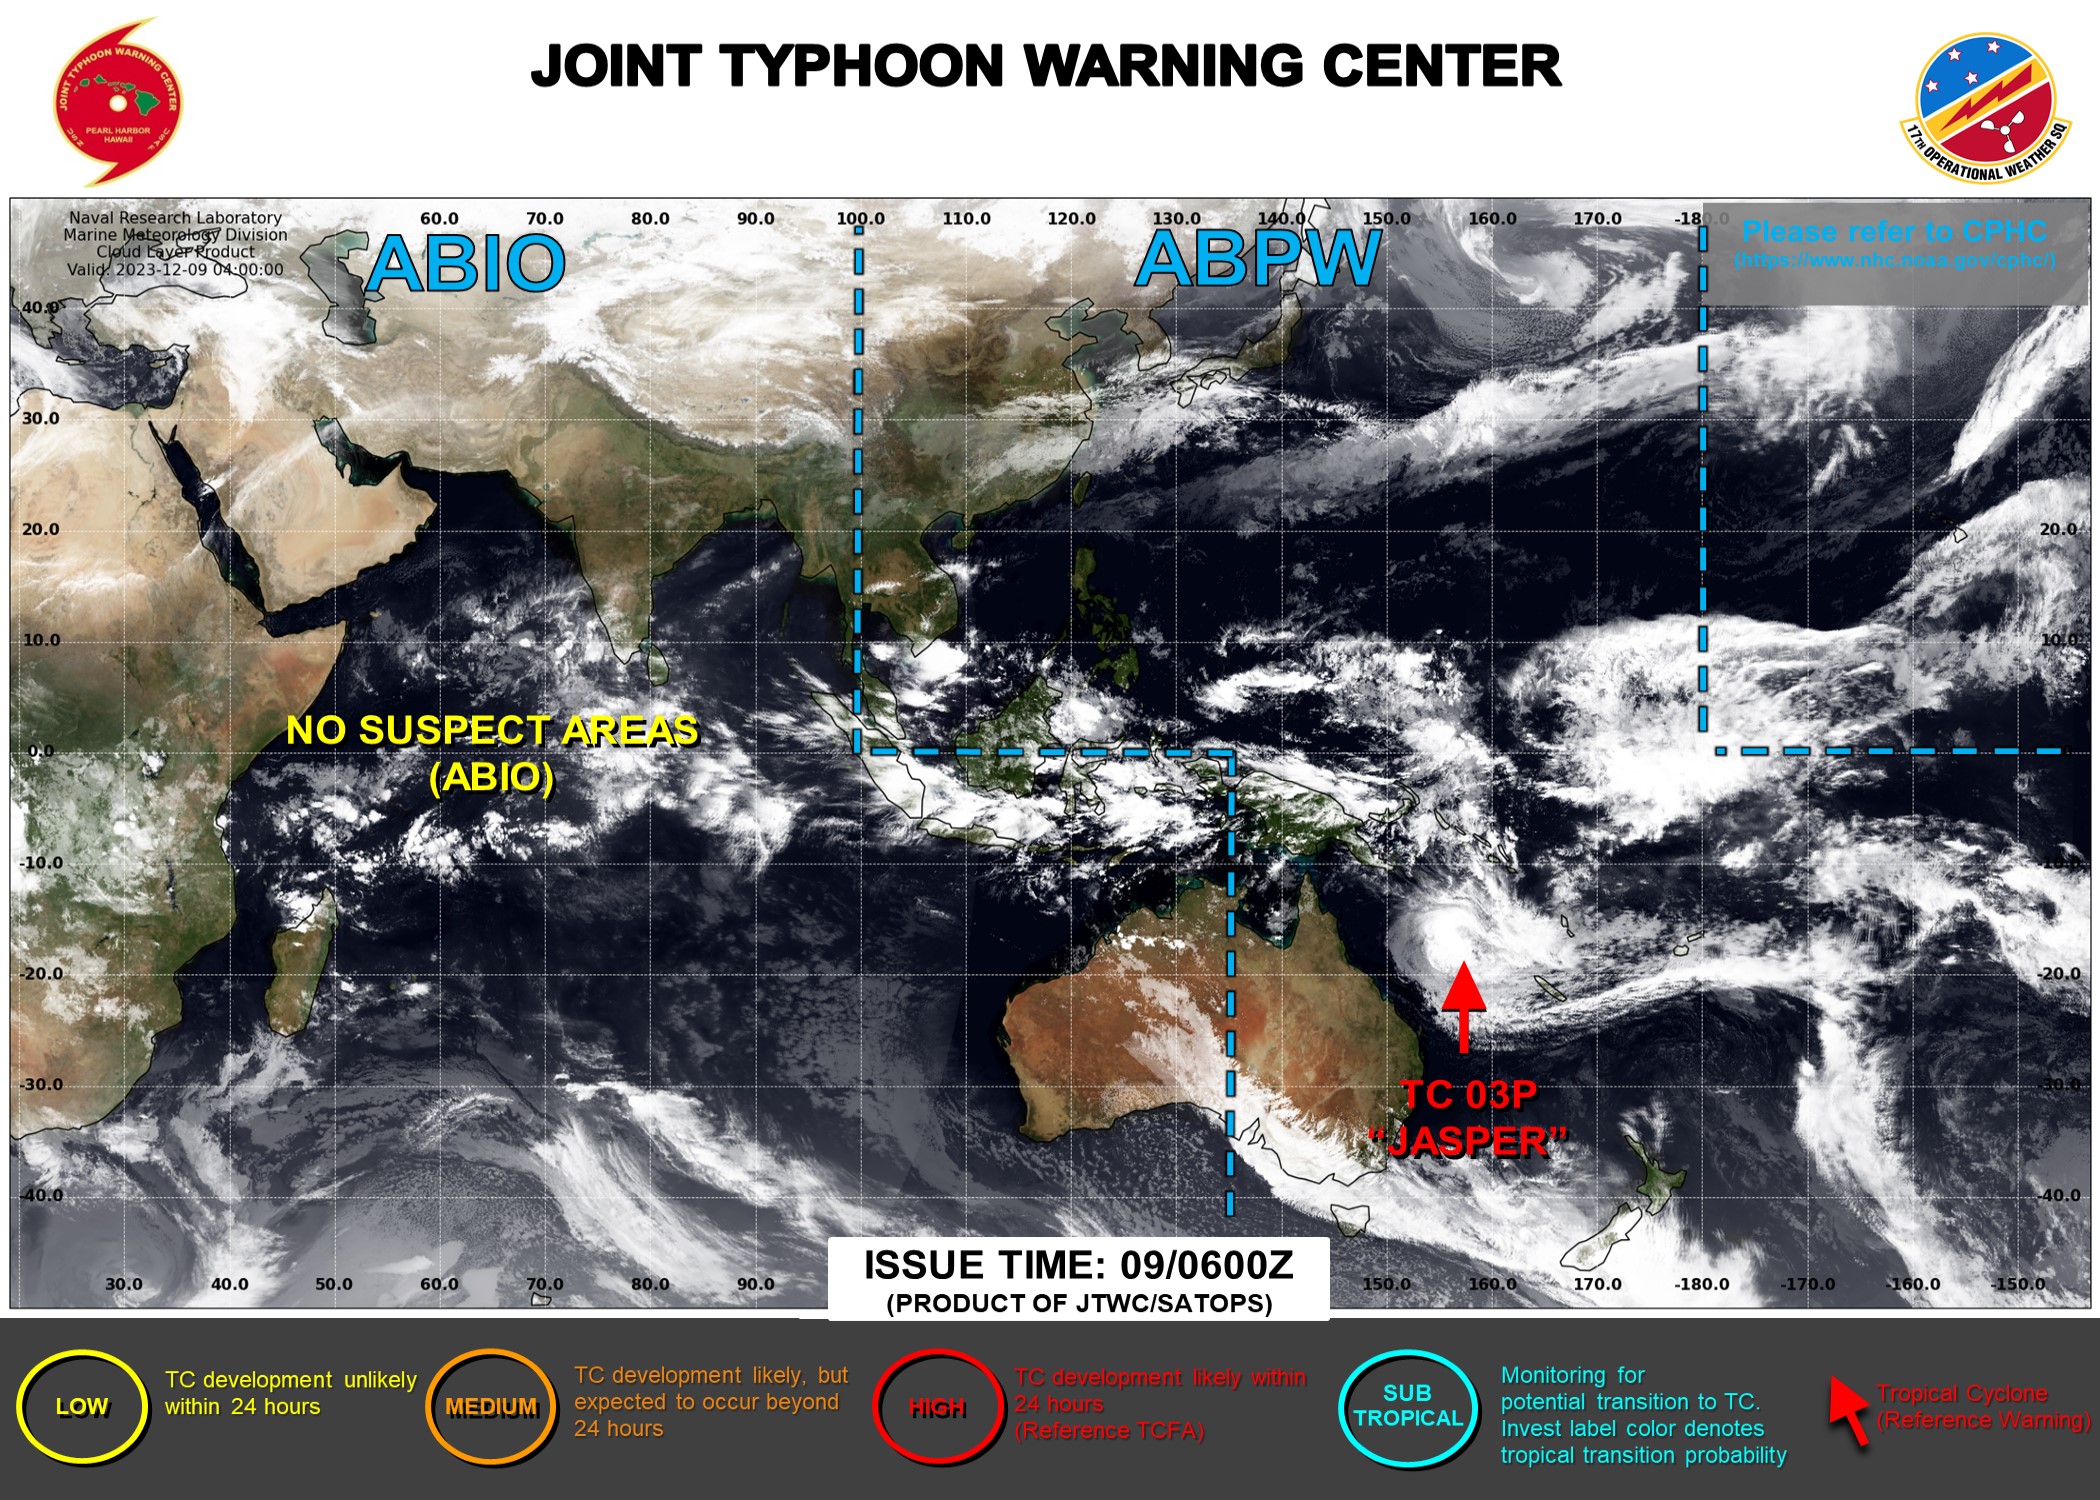 JTWC IS ISSUING 6HOURLY WARNINGS AND 3HOURLY SATELLITE BULLETINS ON TC 03P(JASPER).